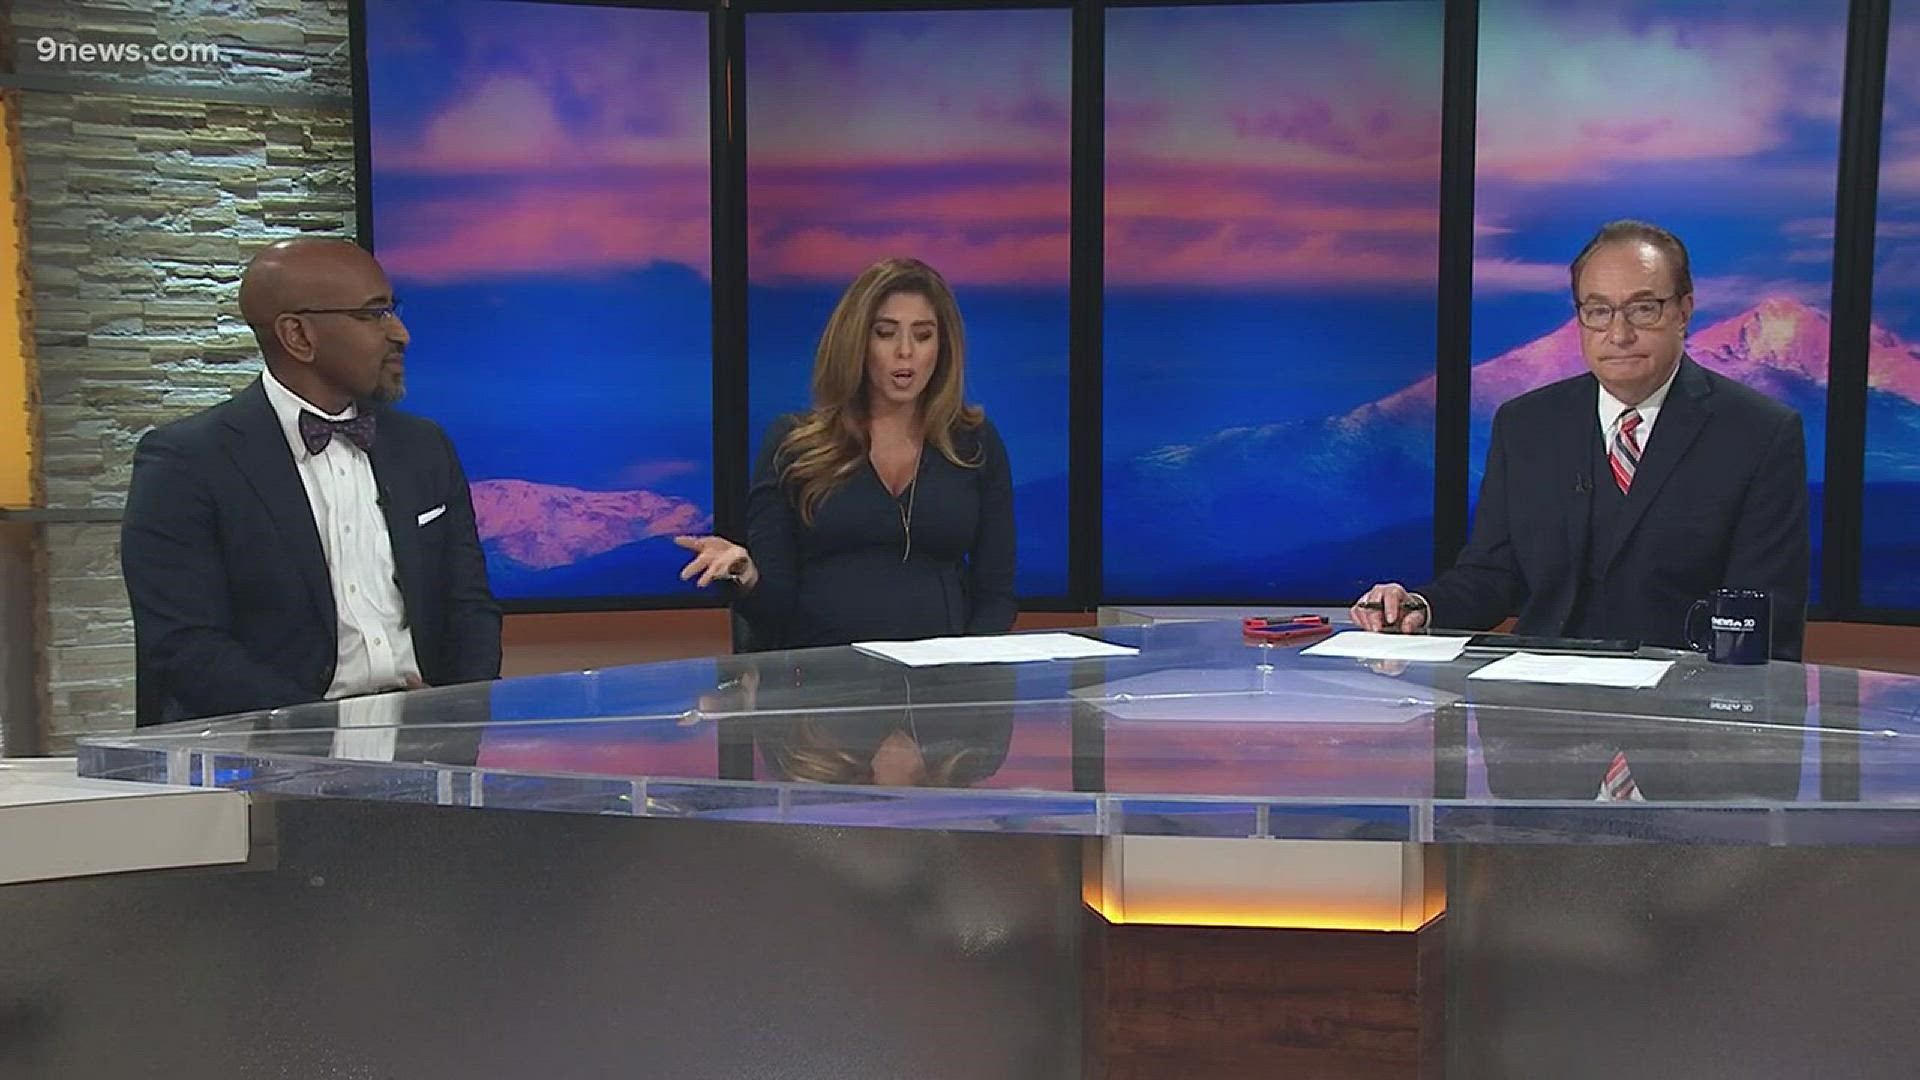 As the government shutdown enters its 24th day, 9NEWS Legal Expert & MSU Professor Whitney Traylor joined the 9NEWS morning show to talk about the shutdown's impacts.